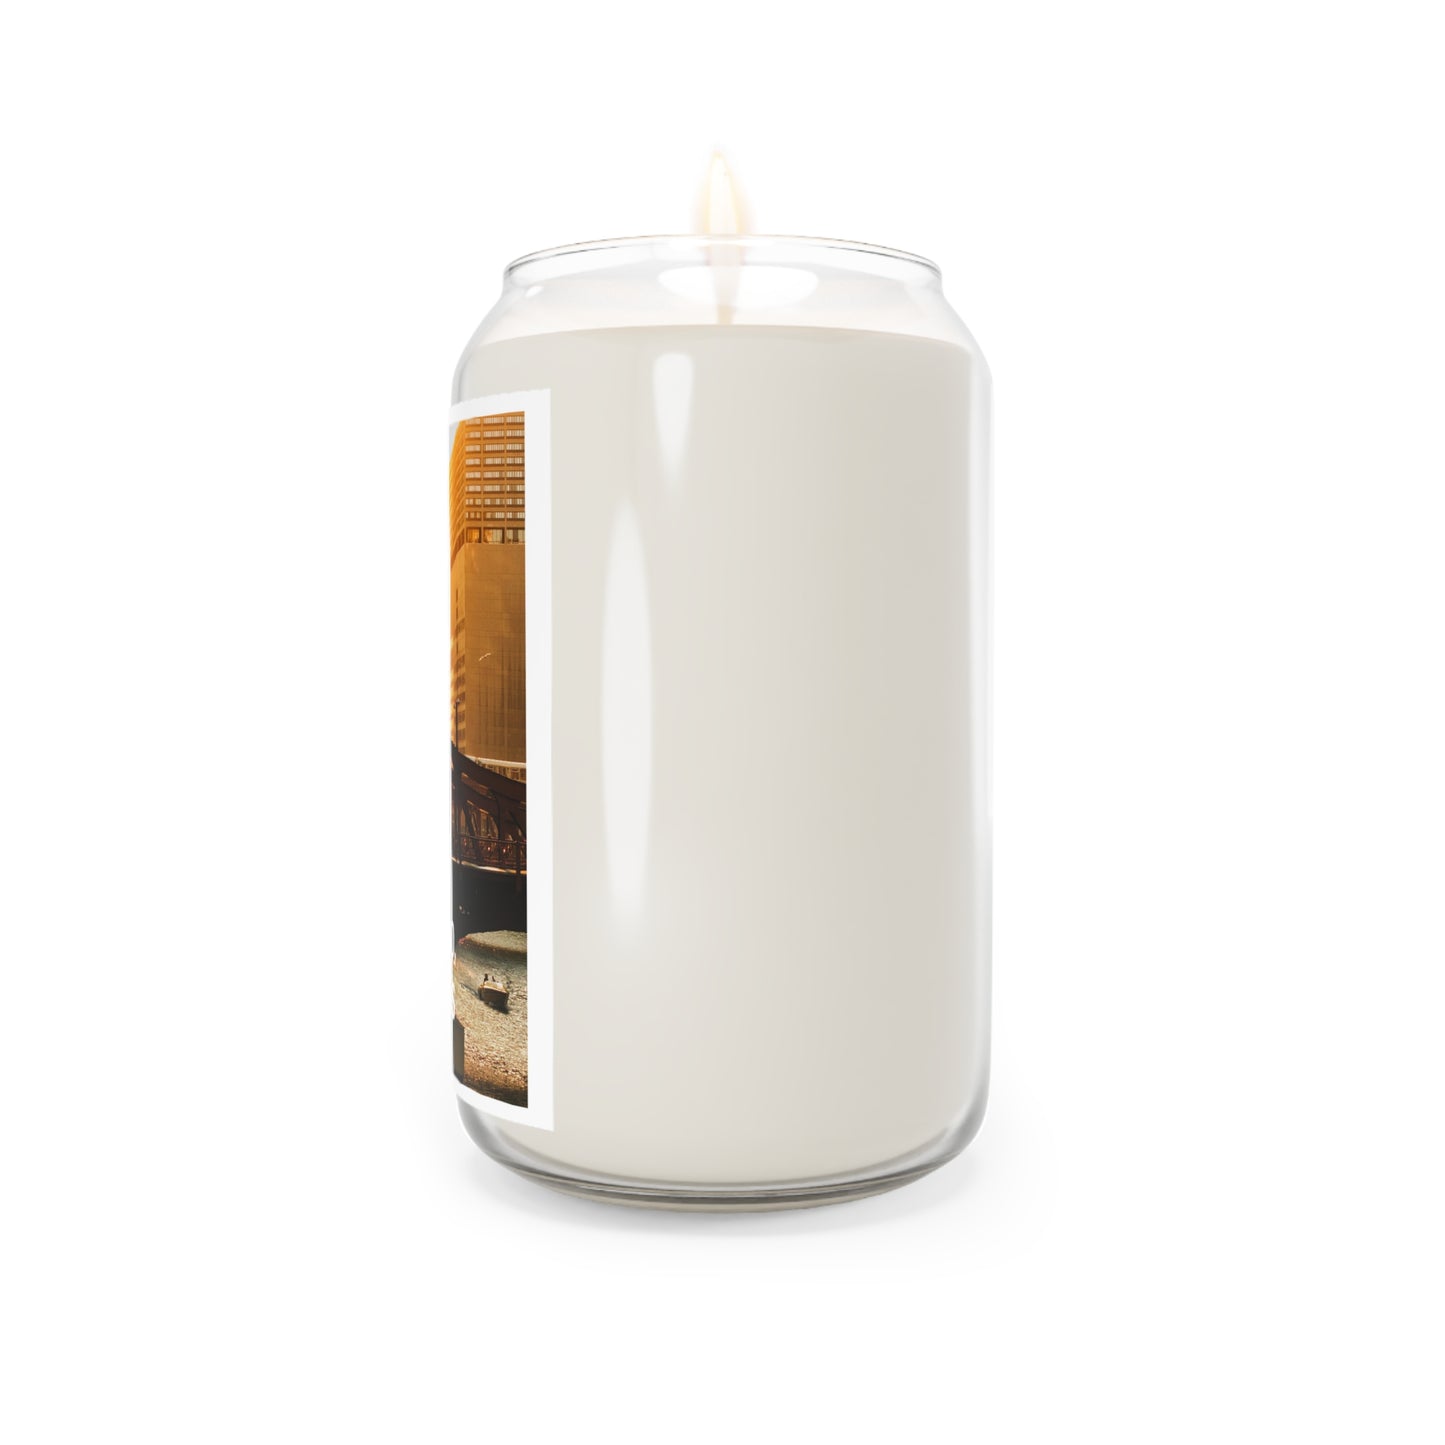 Chicago, Illinois (#004) - Home Town Candles, 13.75oz